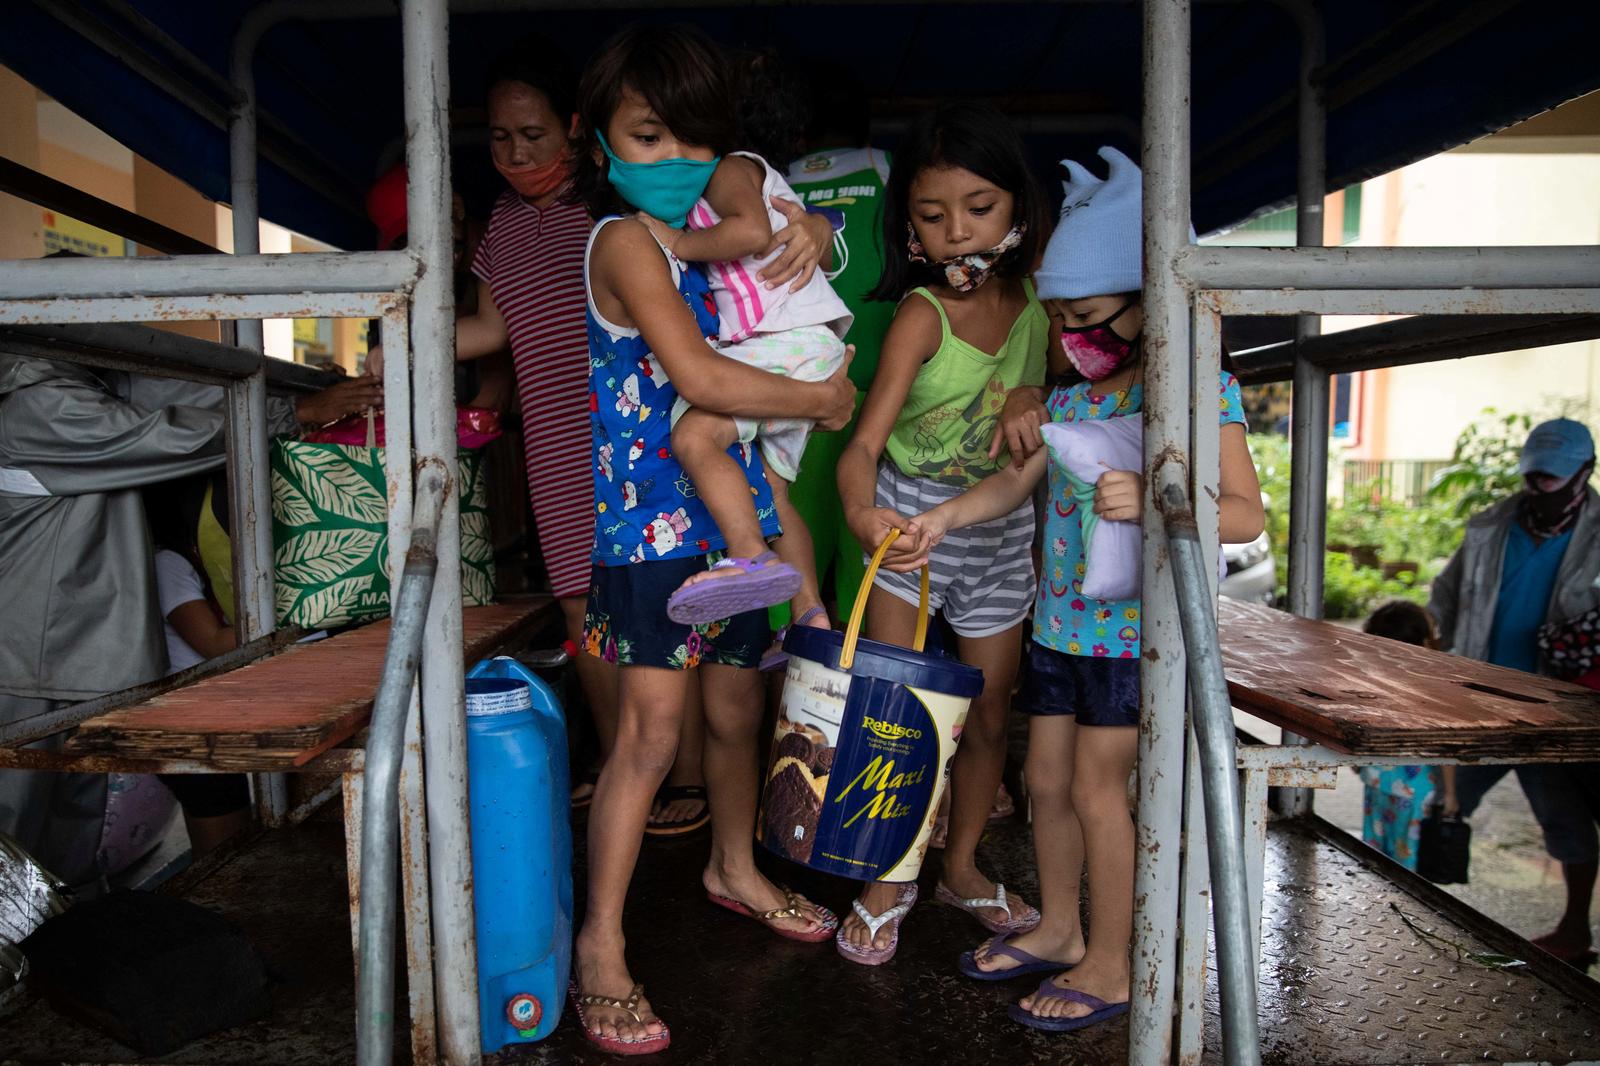 Children get off a government service vehicle upon arrival at an evacuation center ahead of Typhoon Vamco, in Sucat, Muntinlupa, Metro Manila, Philippines, November 11, 2020. Photo: Reuters